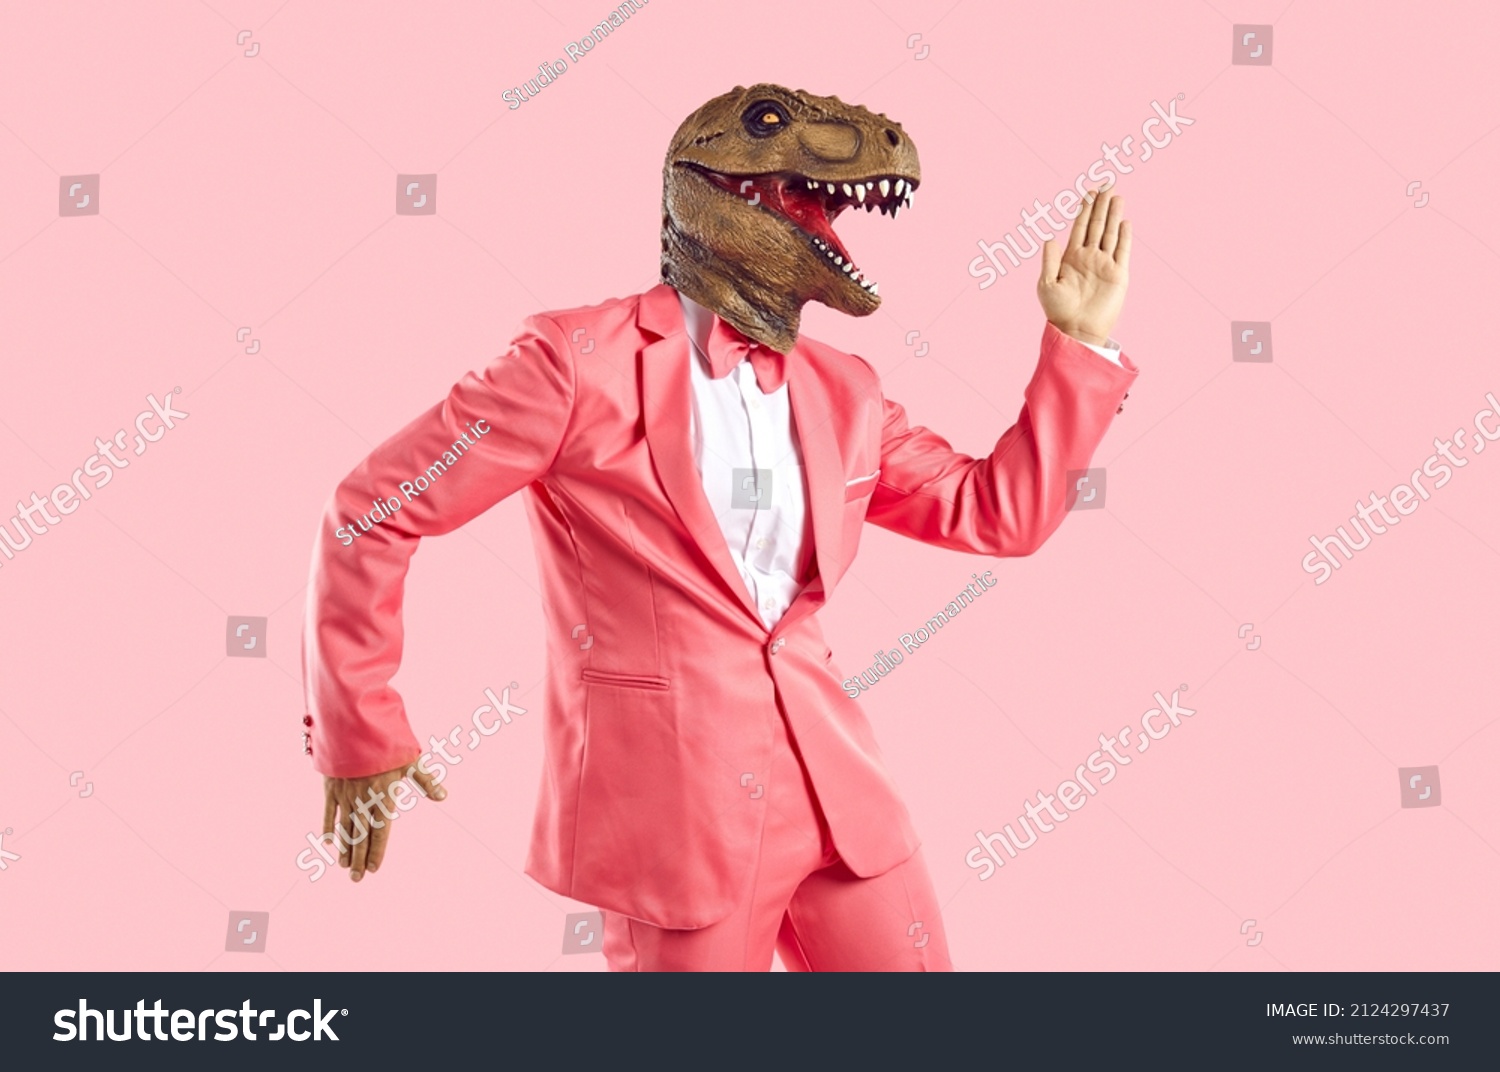 Funny man in rubber dinosaur mask dancing and having fun in the studio. Happy lizard headed guy in stylish funky vibrant pink party suit doing Egyptian dance moves isolated on pink colour background #2124297437